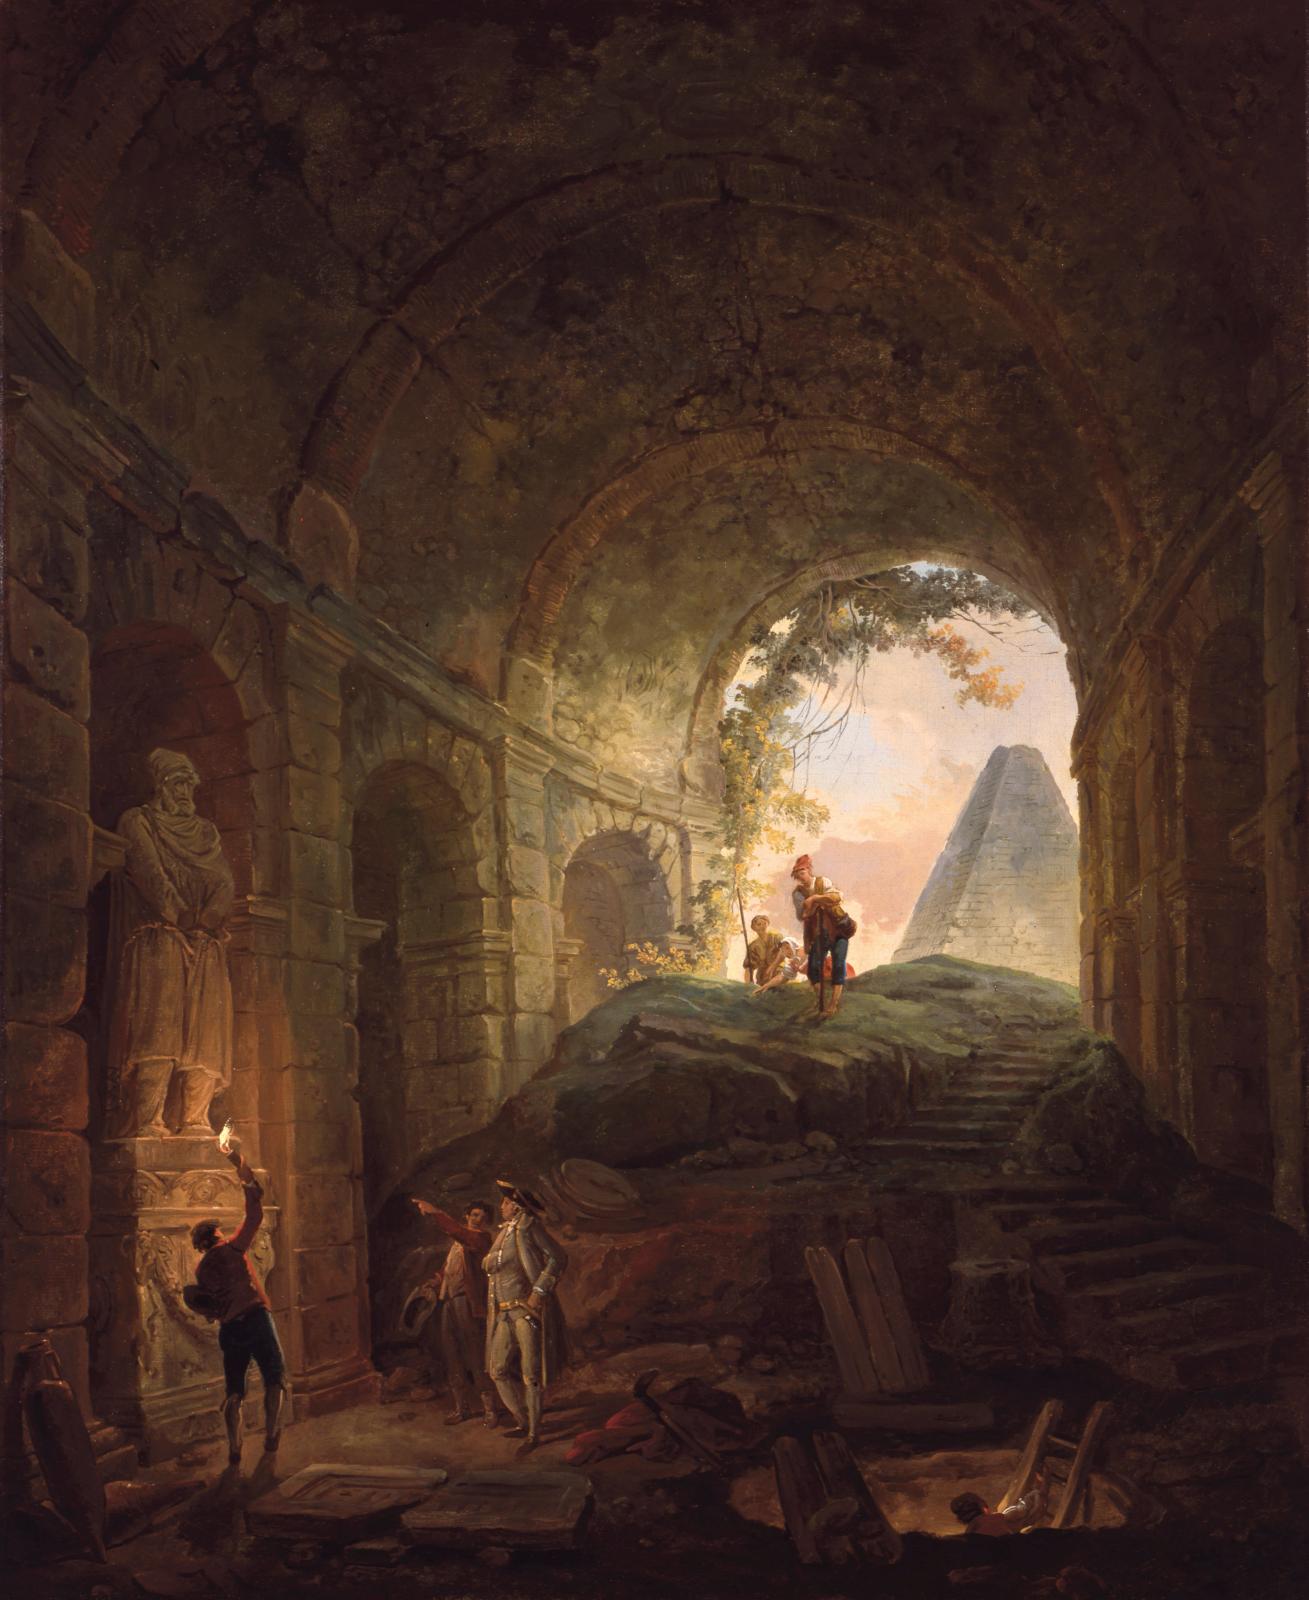 The Imaginary World of Ruins at the Lyon Musée Des Beaux-Arts